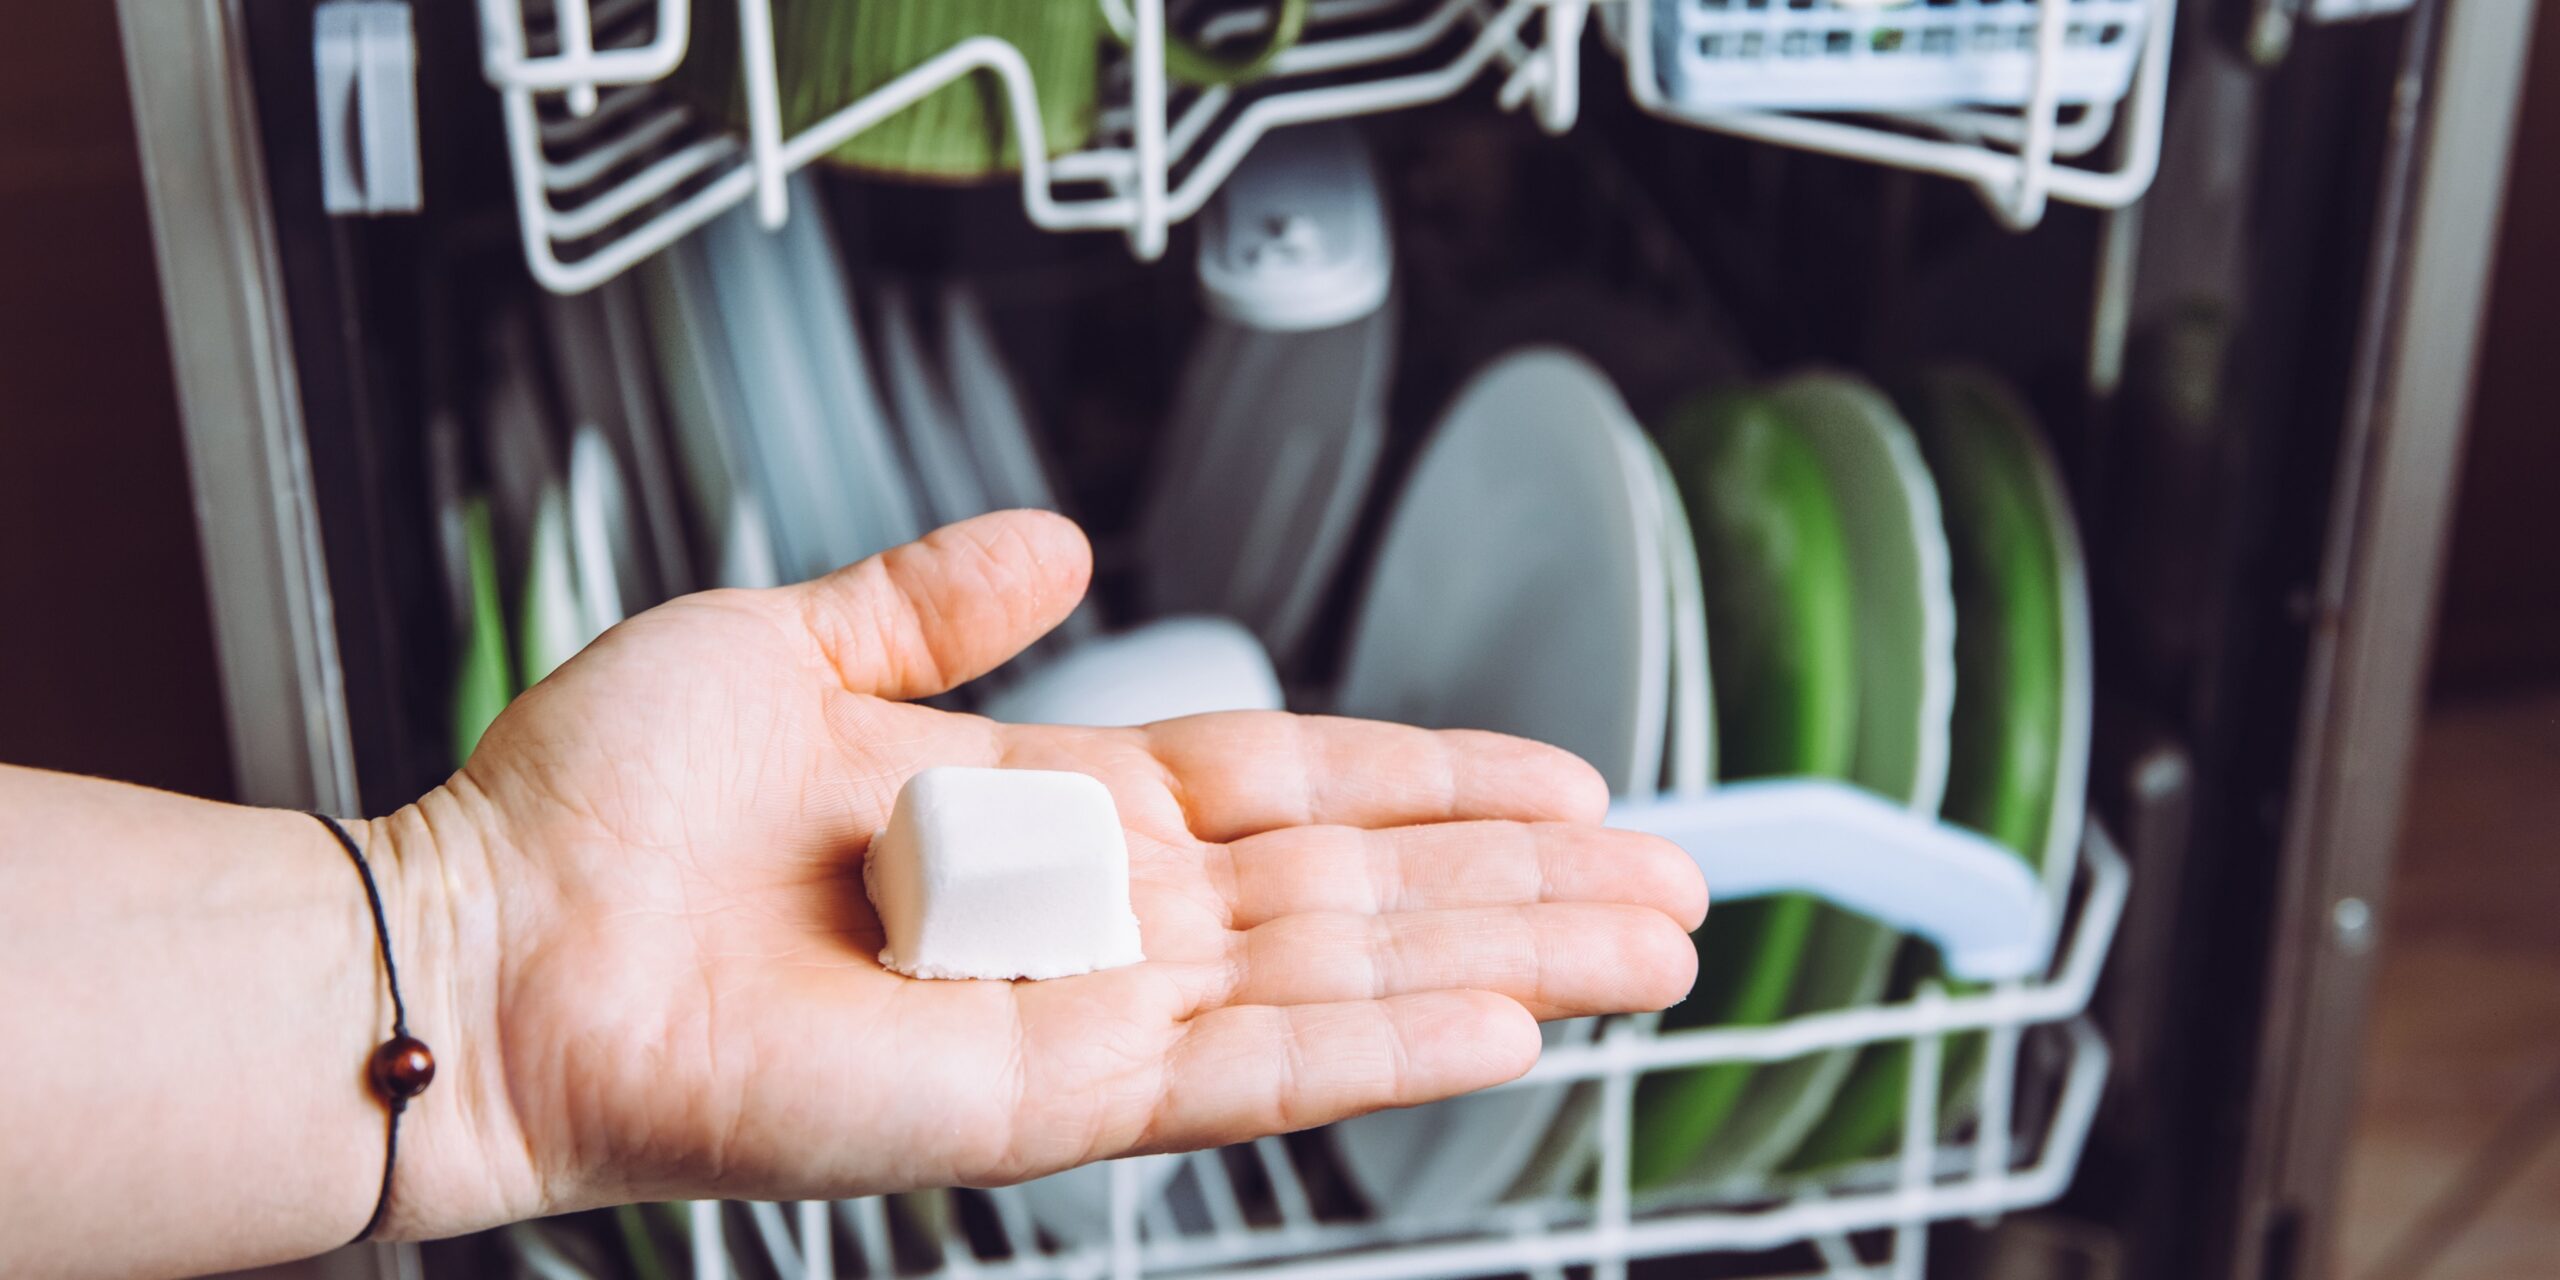 How to Use Dishwasher Pods